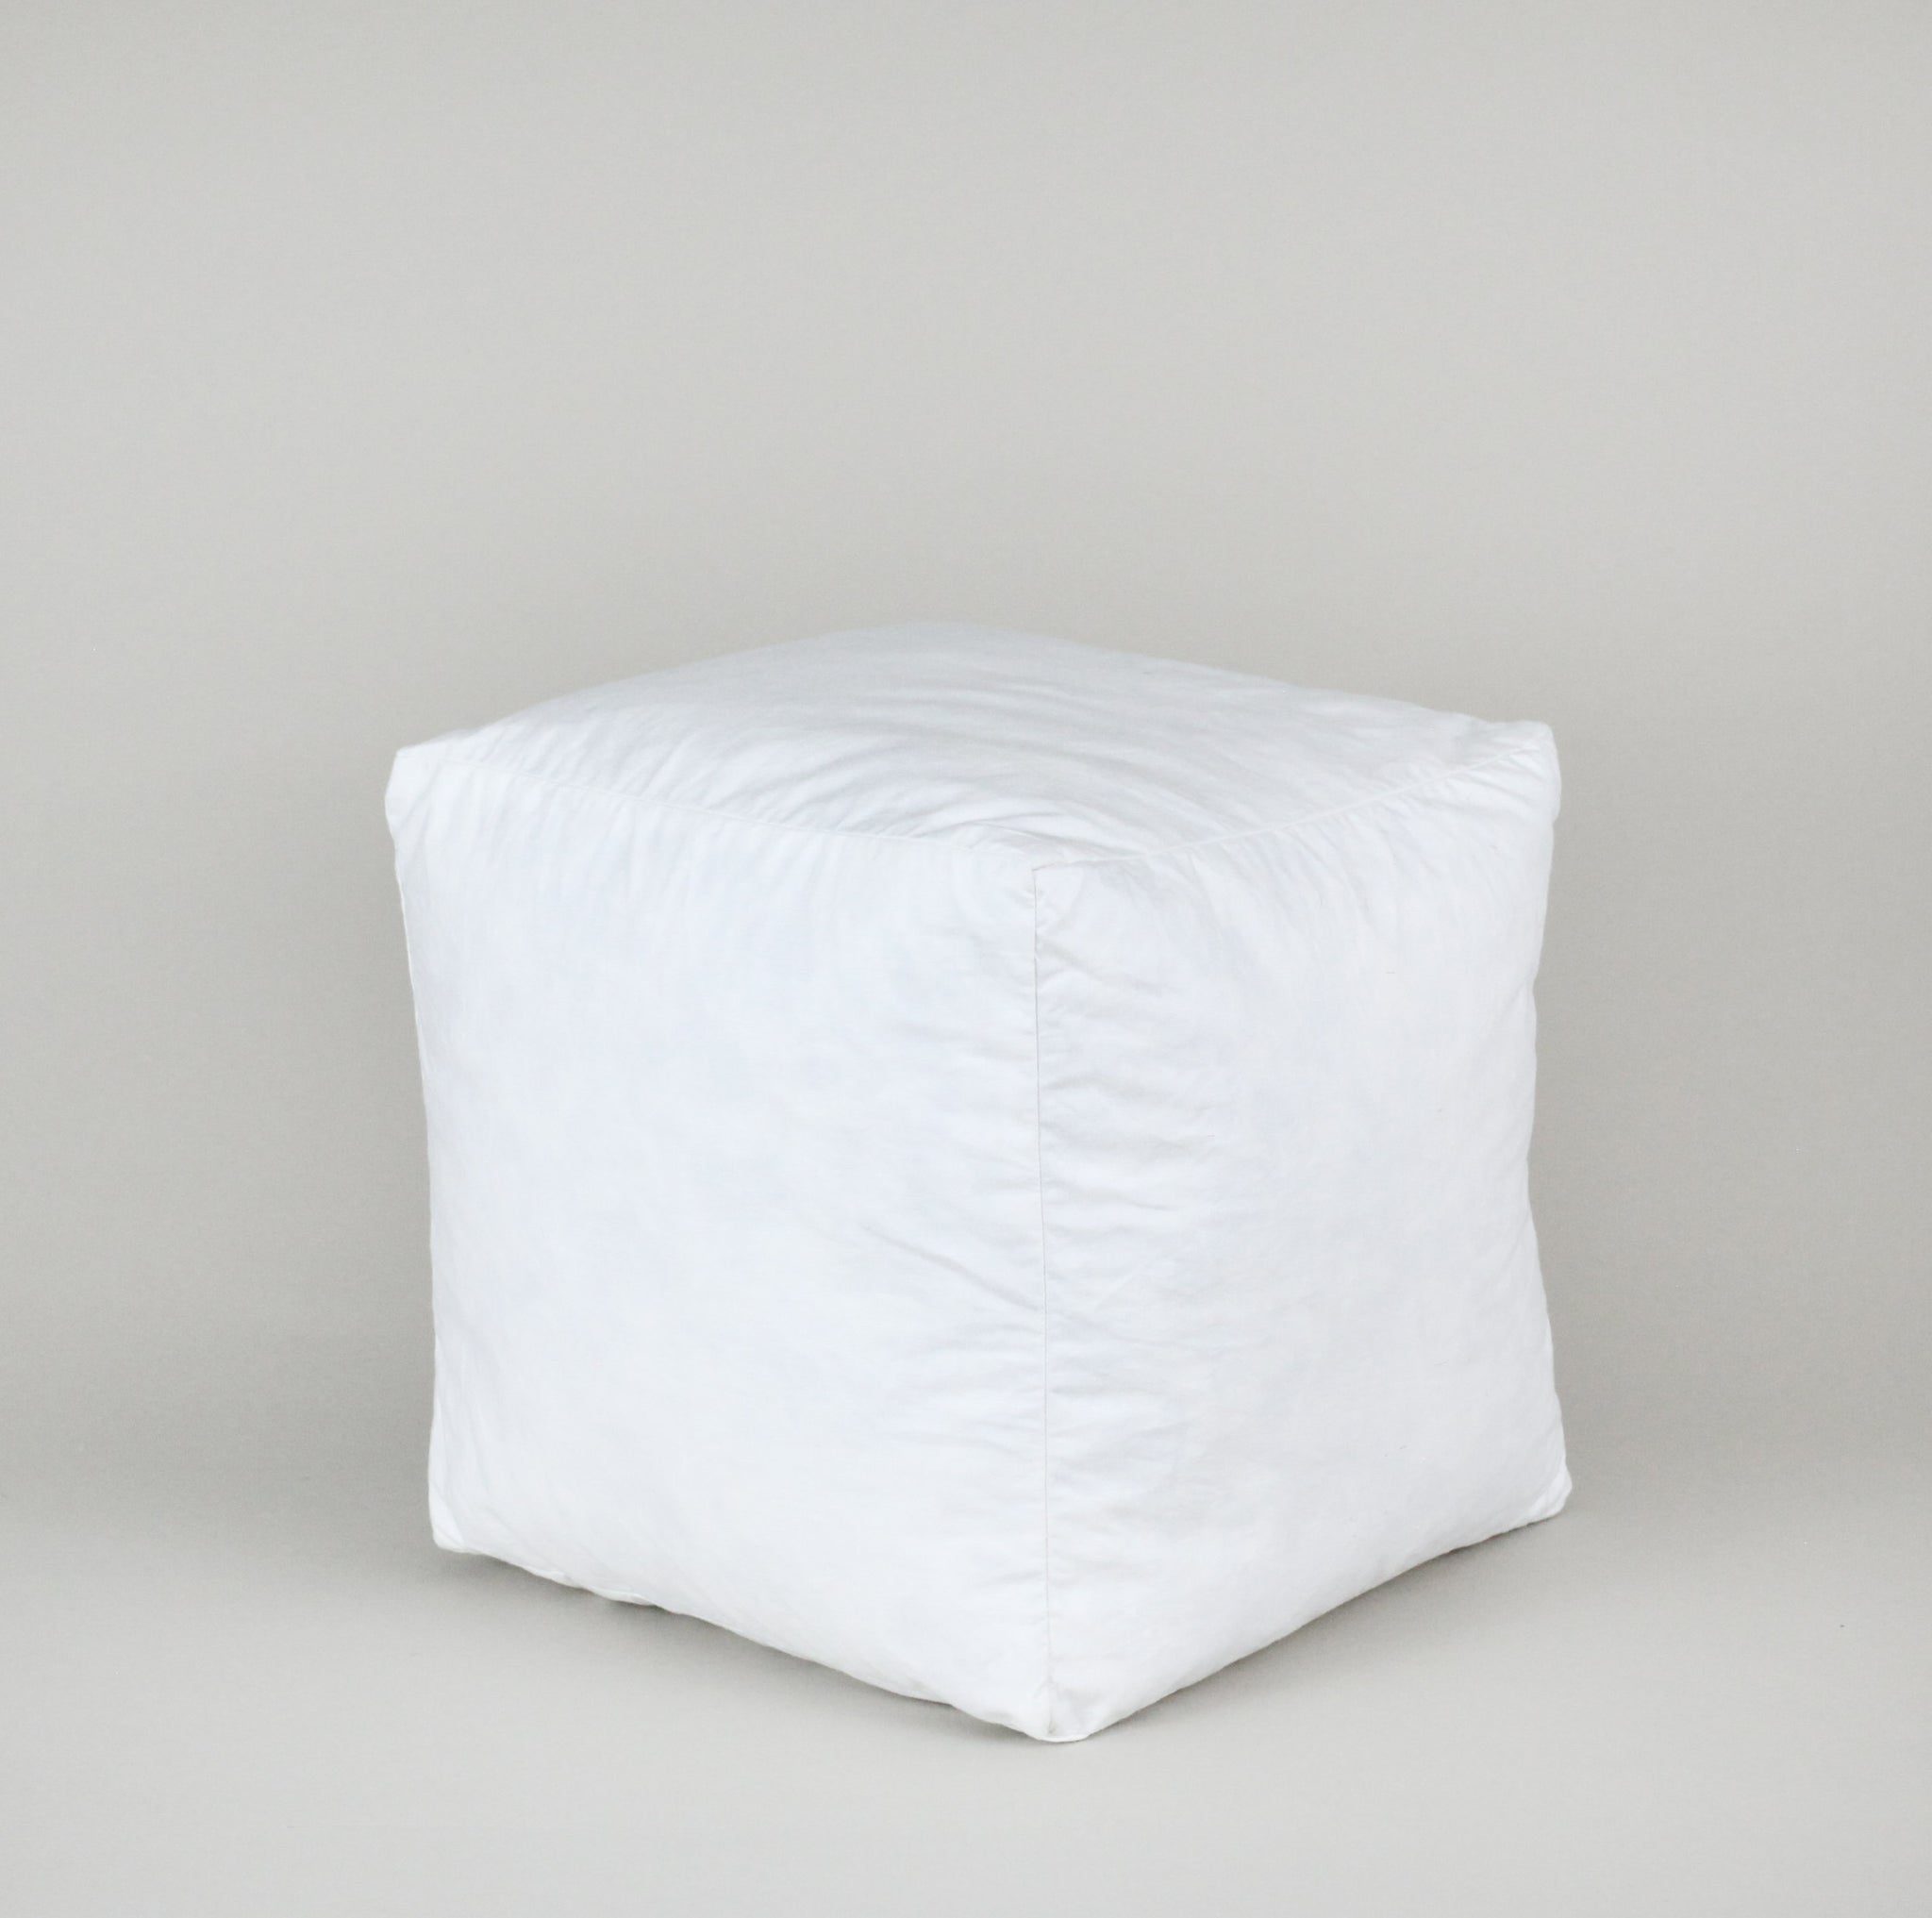 Cube Pillow Inserts